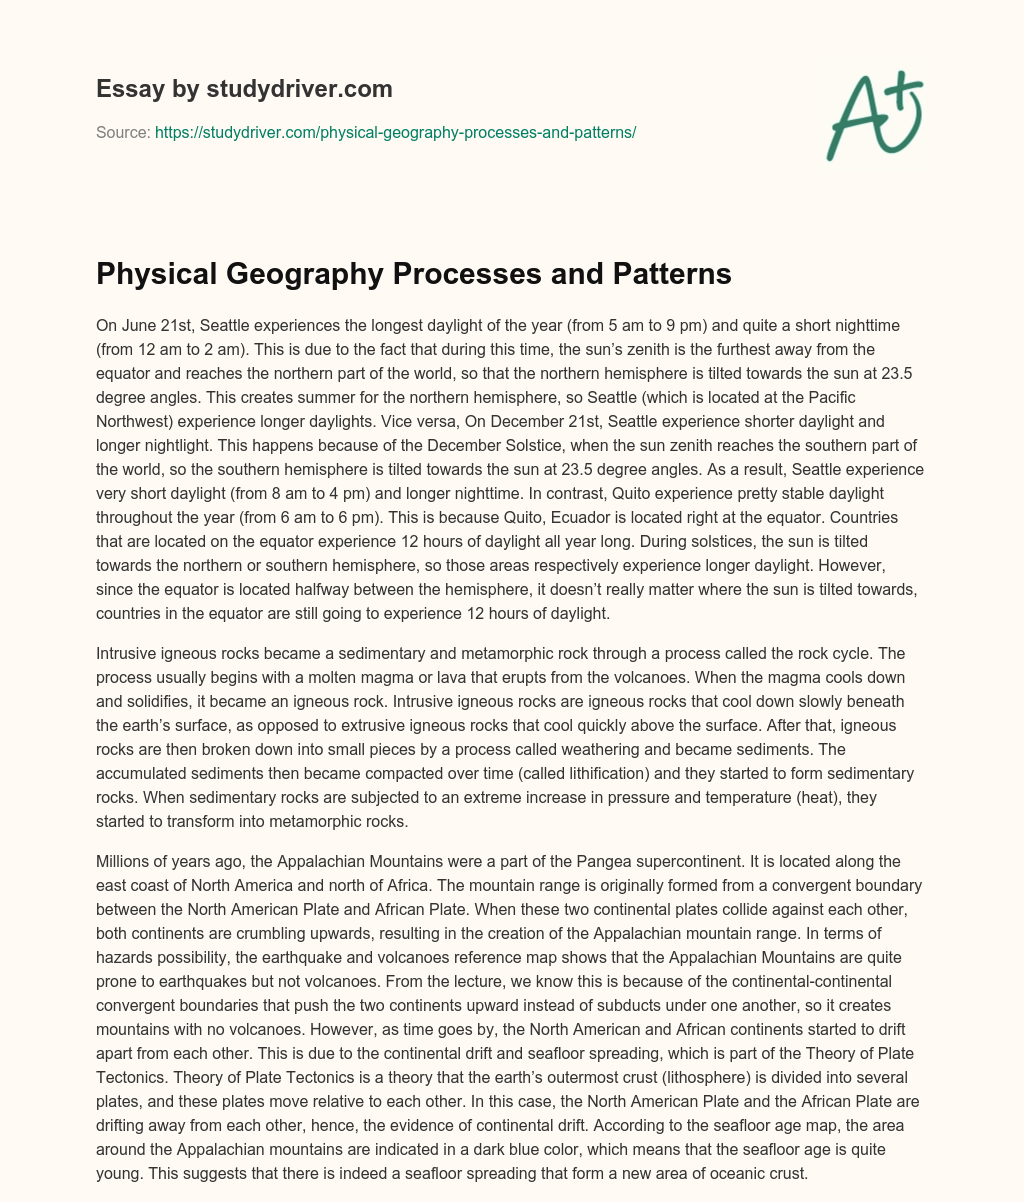 Physical Geography Processes and Patterns essay